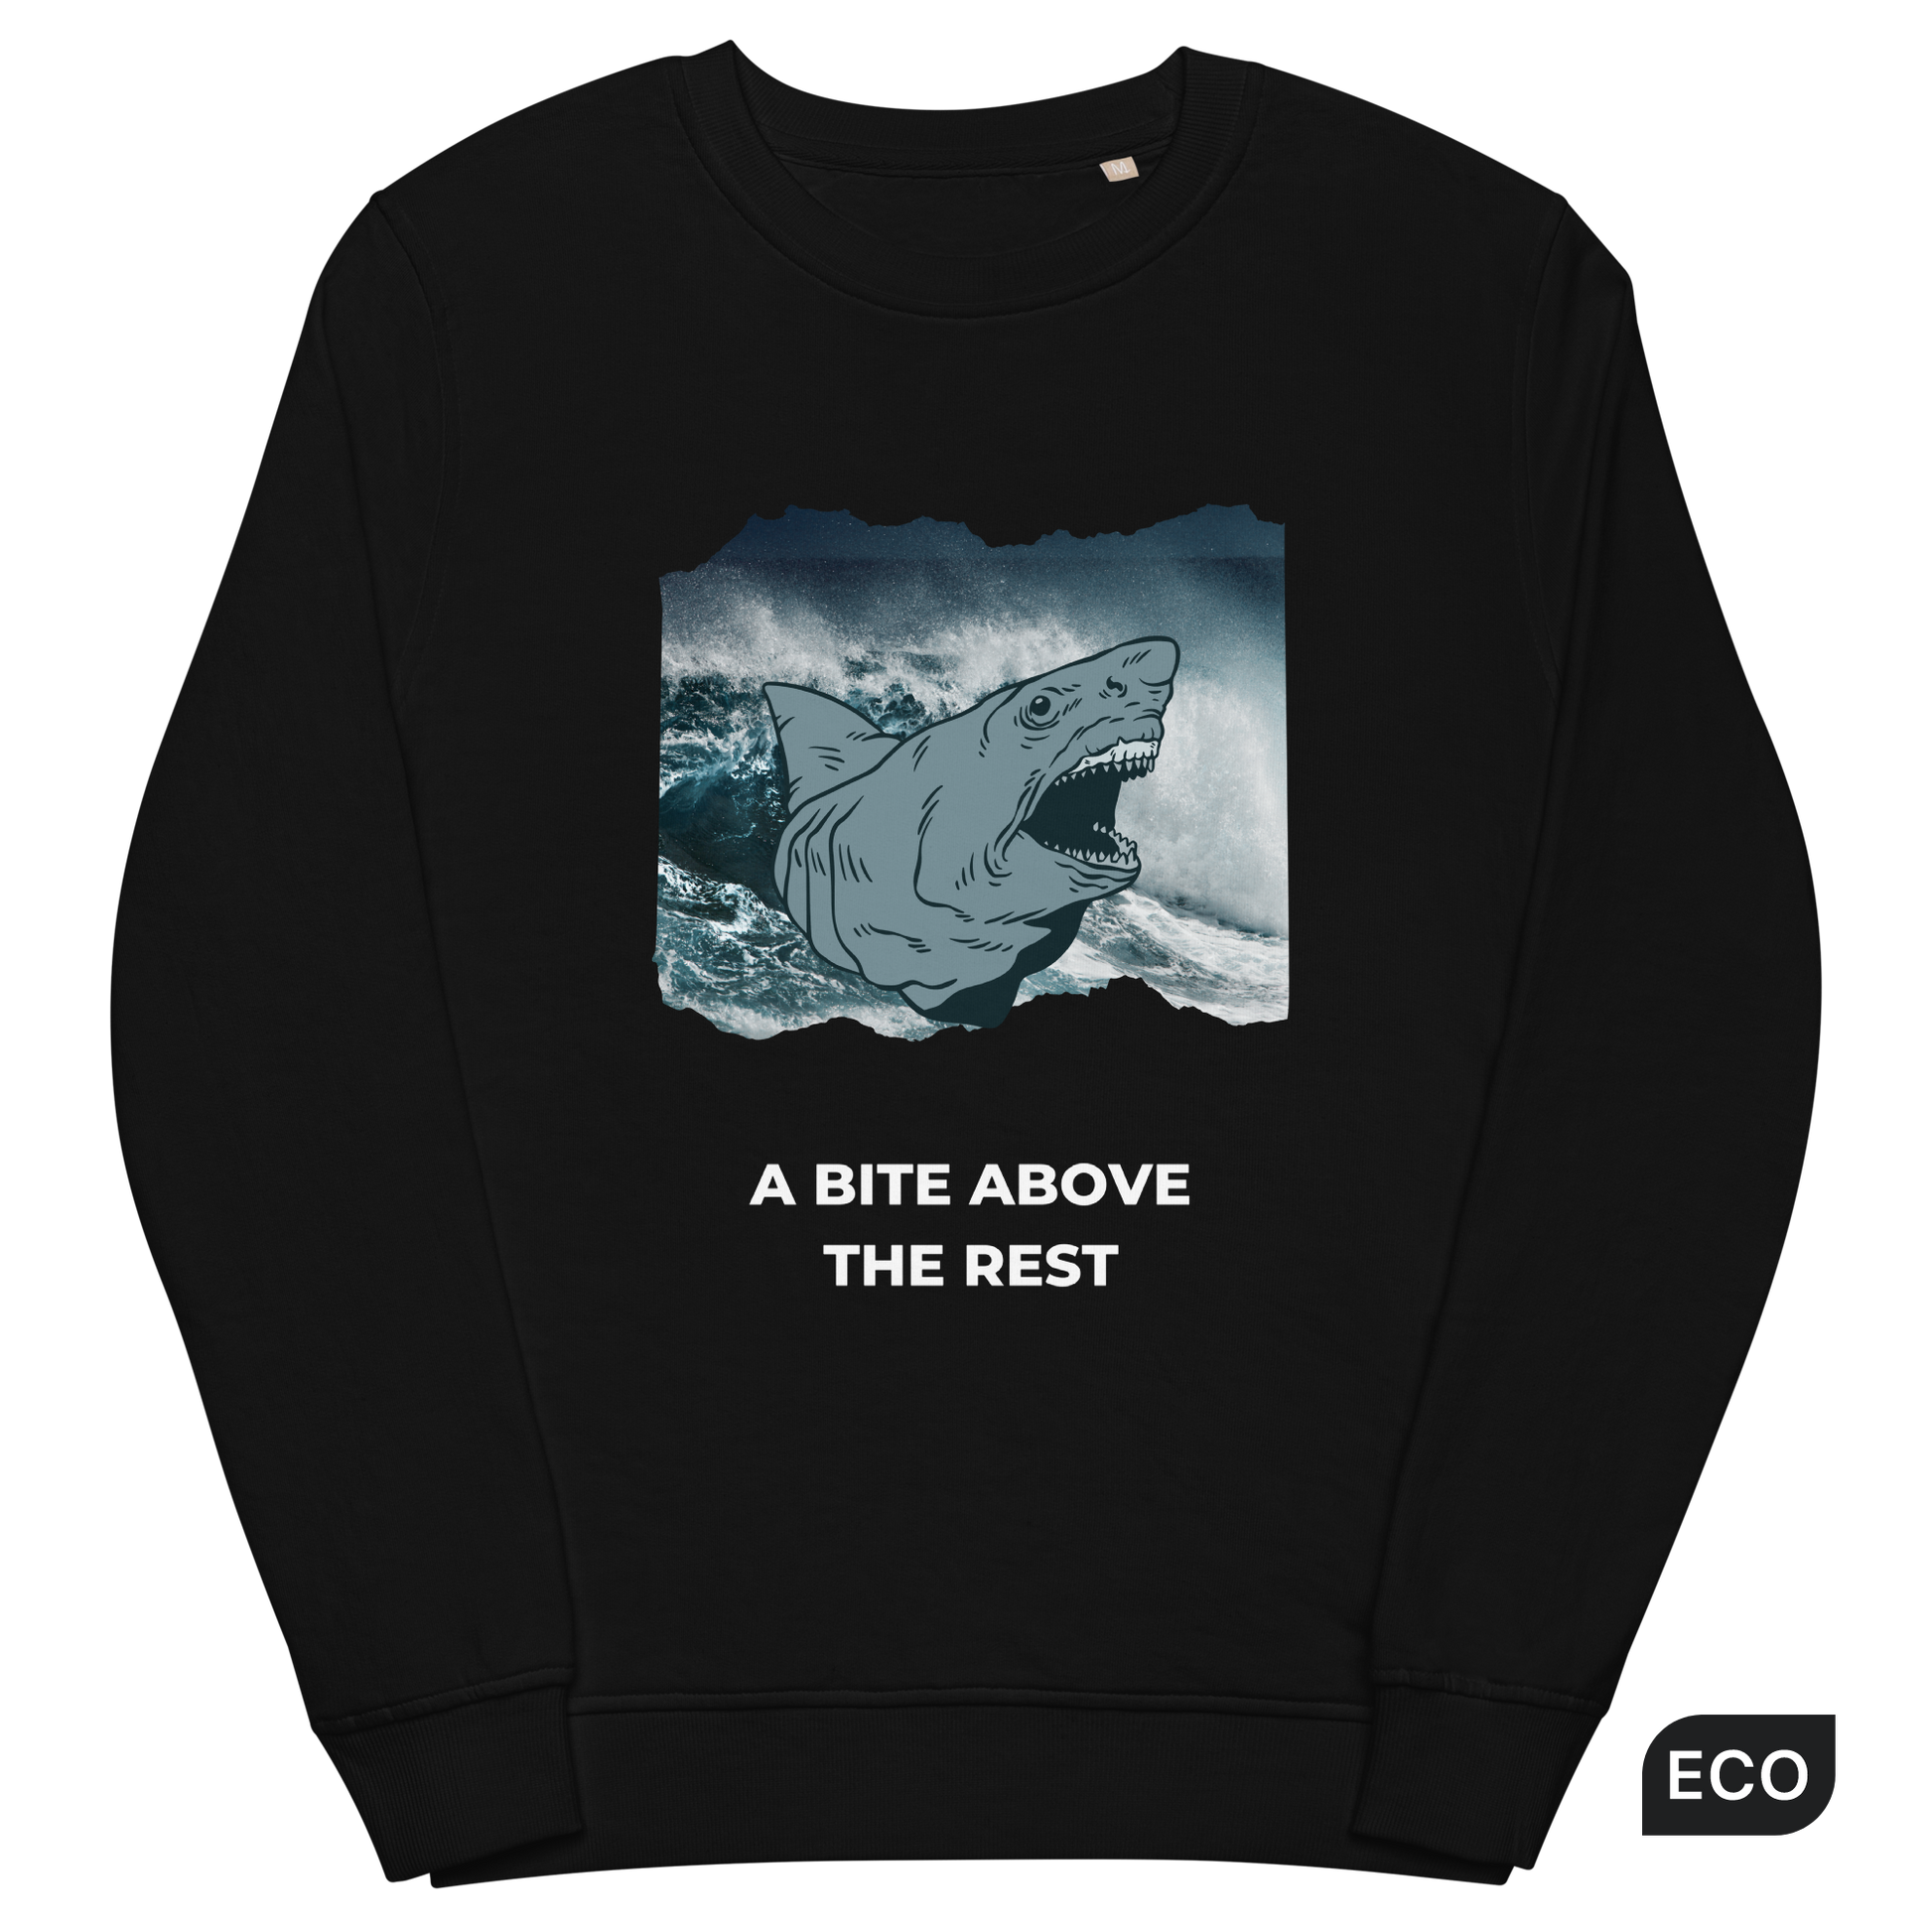 Black Organic Cotton Megalodon Sweatshirt featuring the jaw-dropping 'A Bite Above the Rest' graphic on the chest - Funny Graphic Megalodon Sweatshirts - Boozy Fox